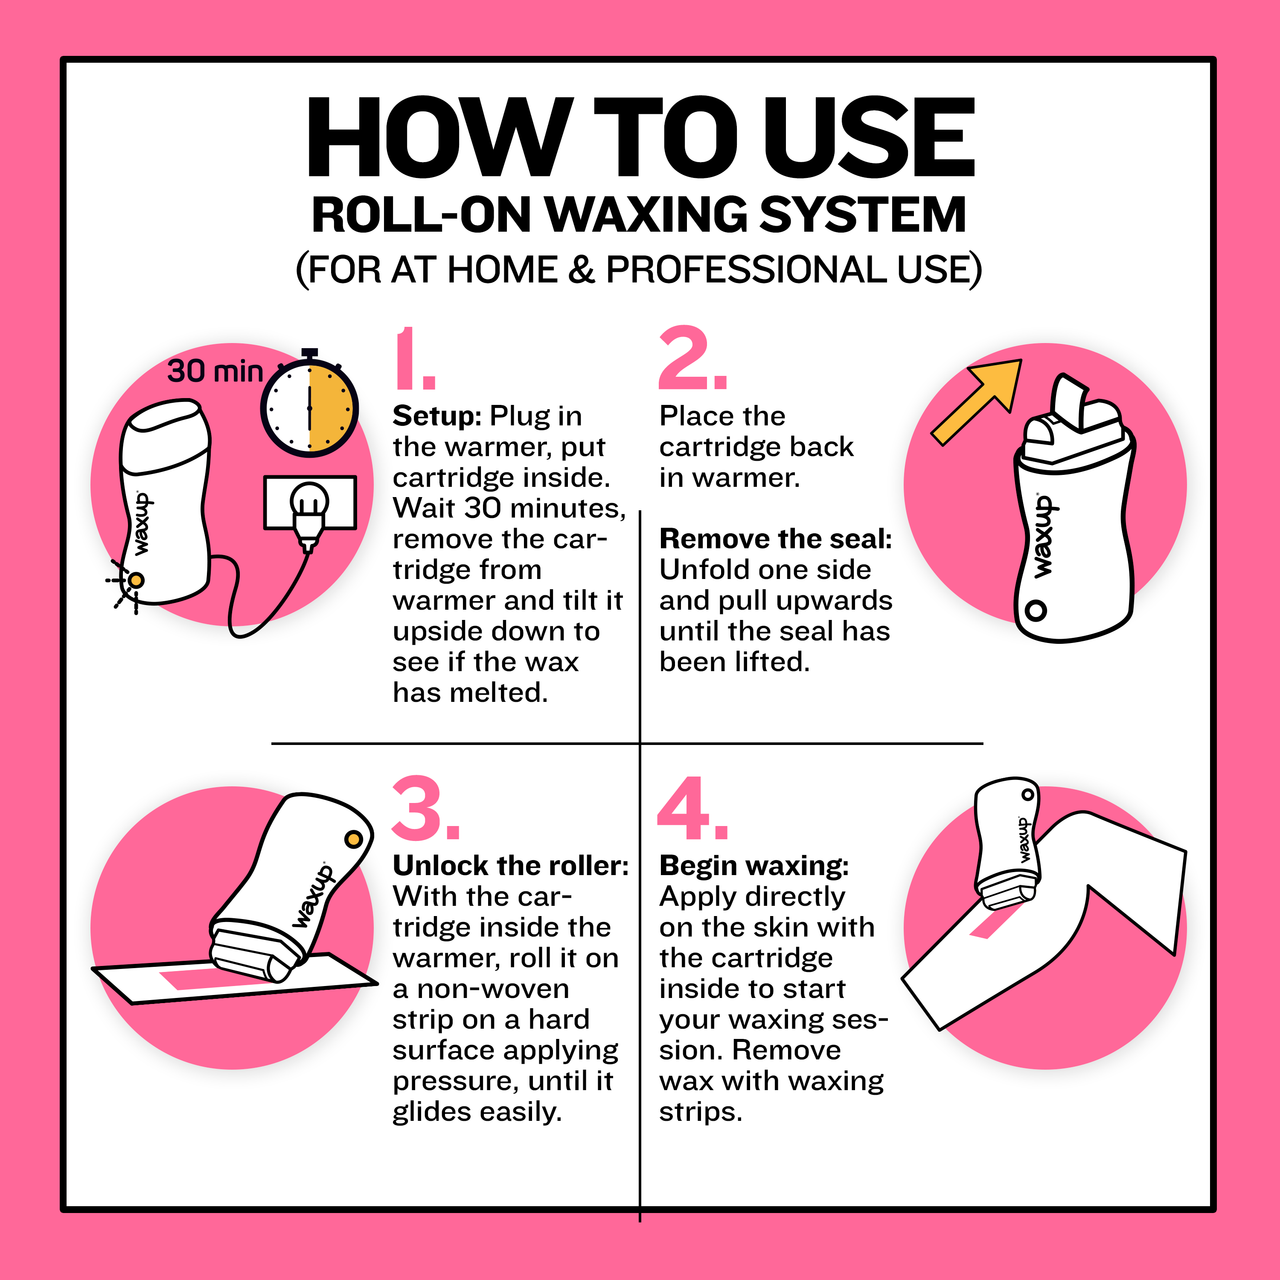 Rose Roller Waxing Kit Buy With Prime - thatswaxup -  - Roller Waxing Kit - waxup hair removal wax body waxing kit women and men professional waxing supplies